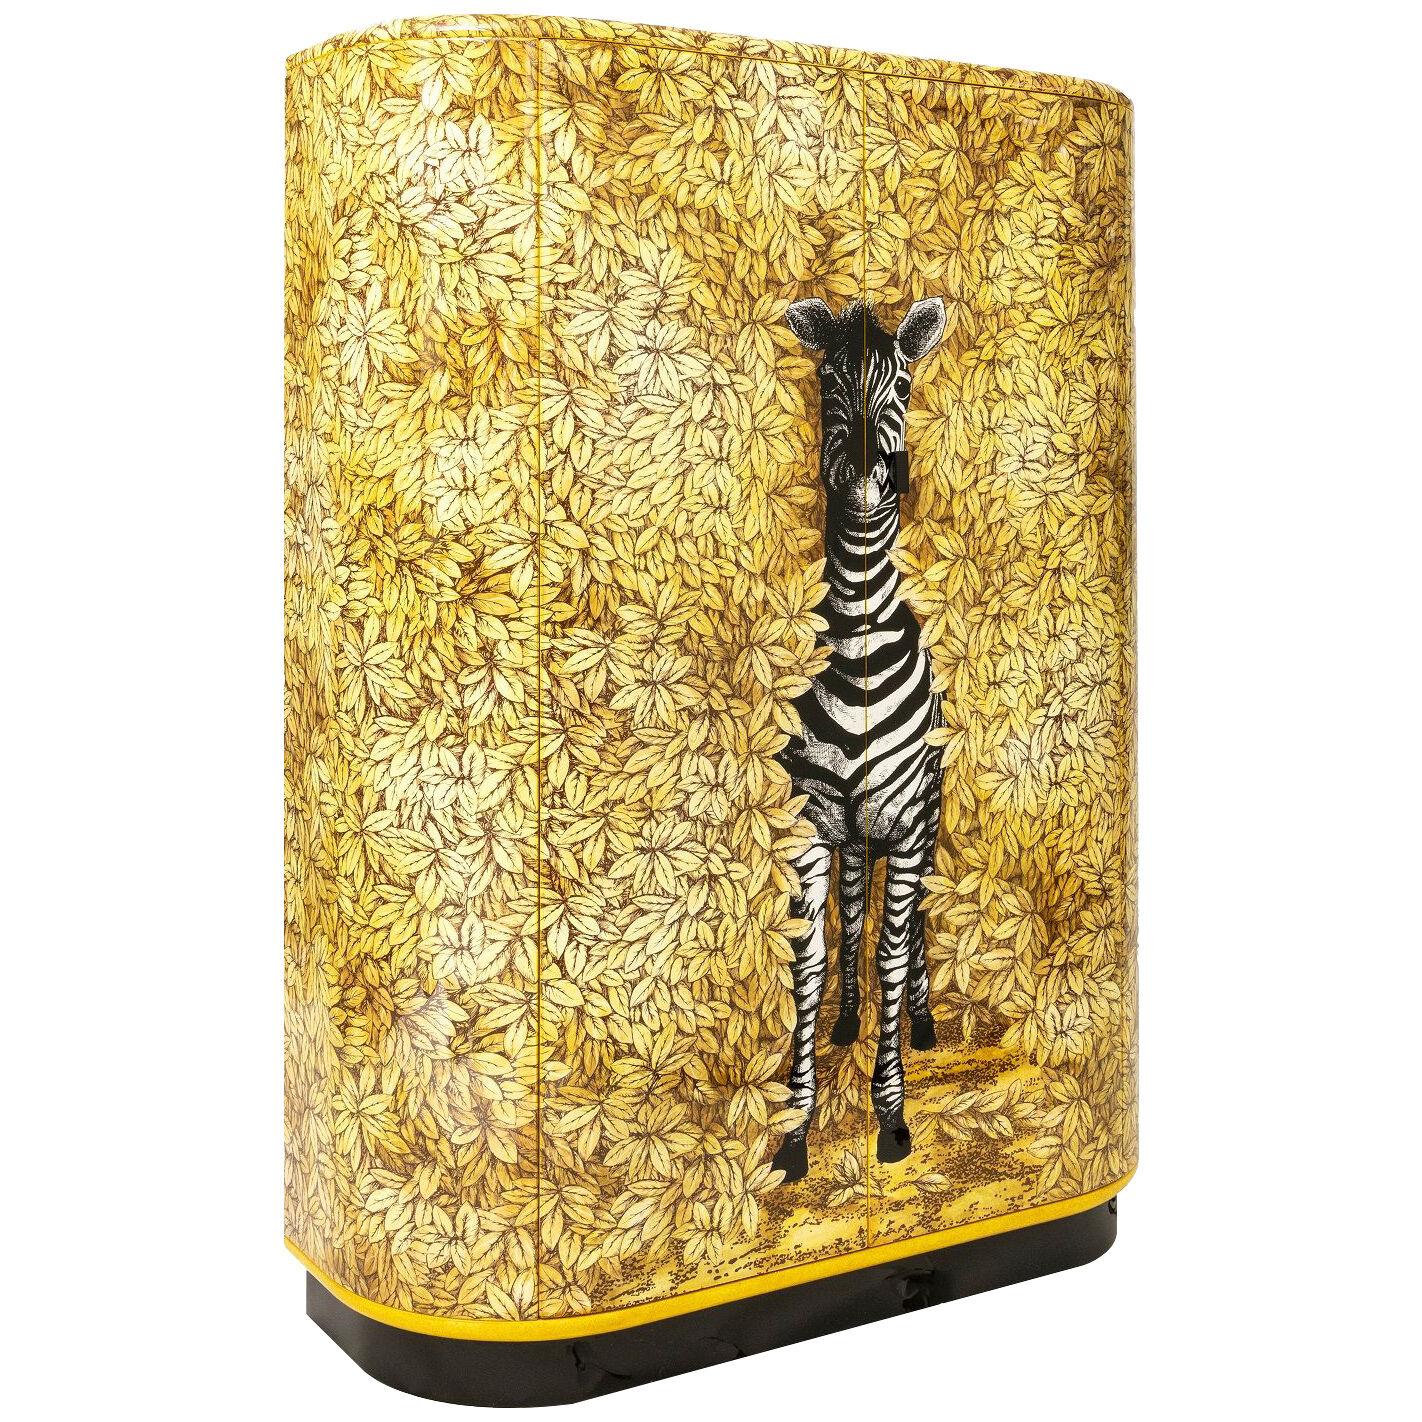 Curved Zebra Cabinet by Atelier Fornasetti, Italy 2020